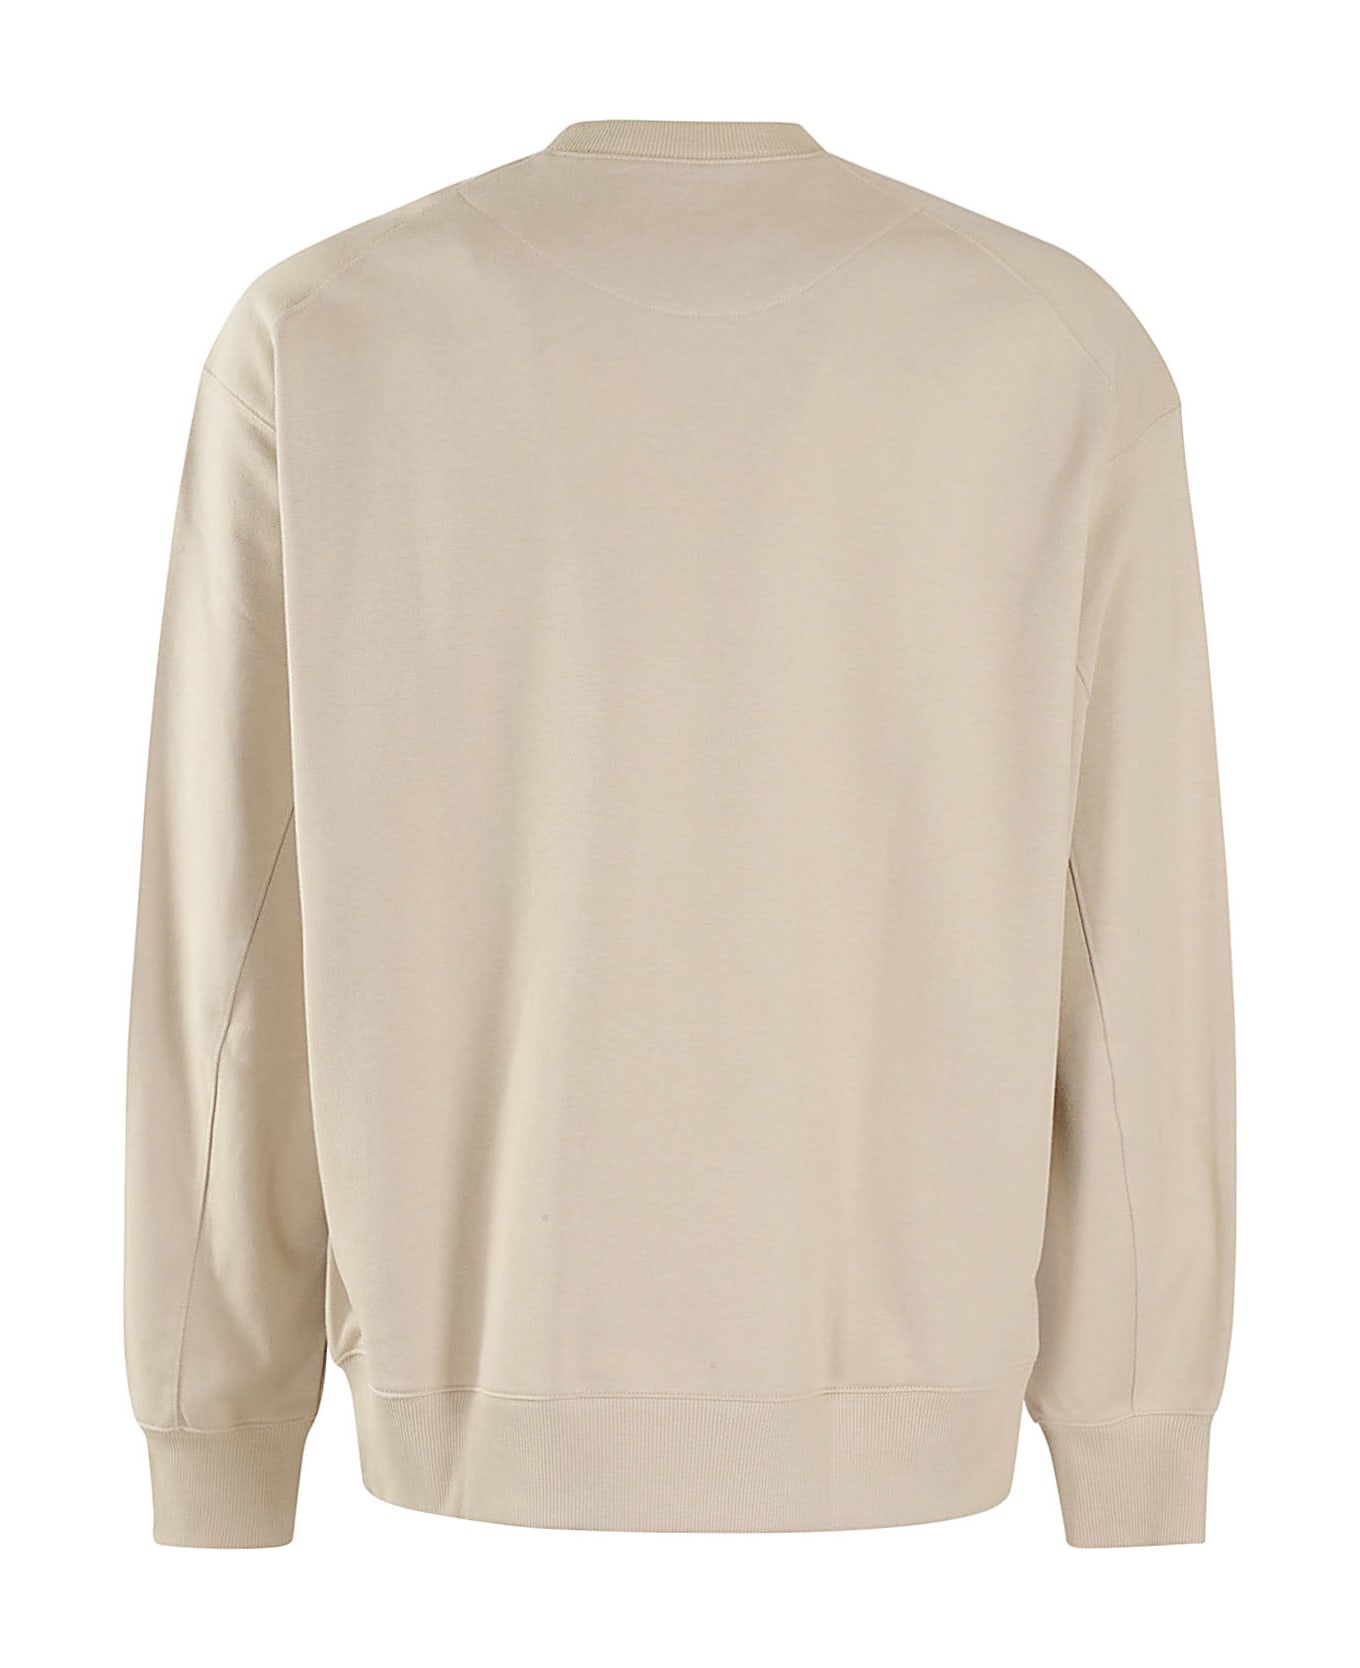 Y-3 Ft Crew Sweat - Taupe